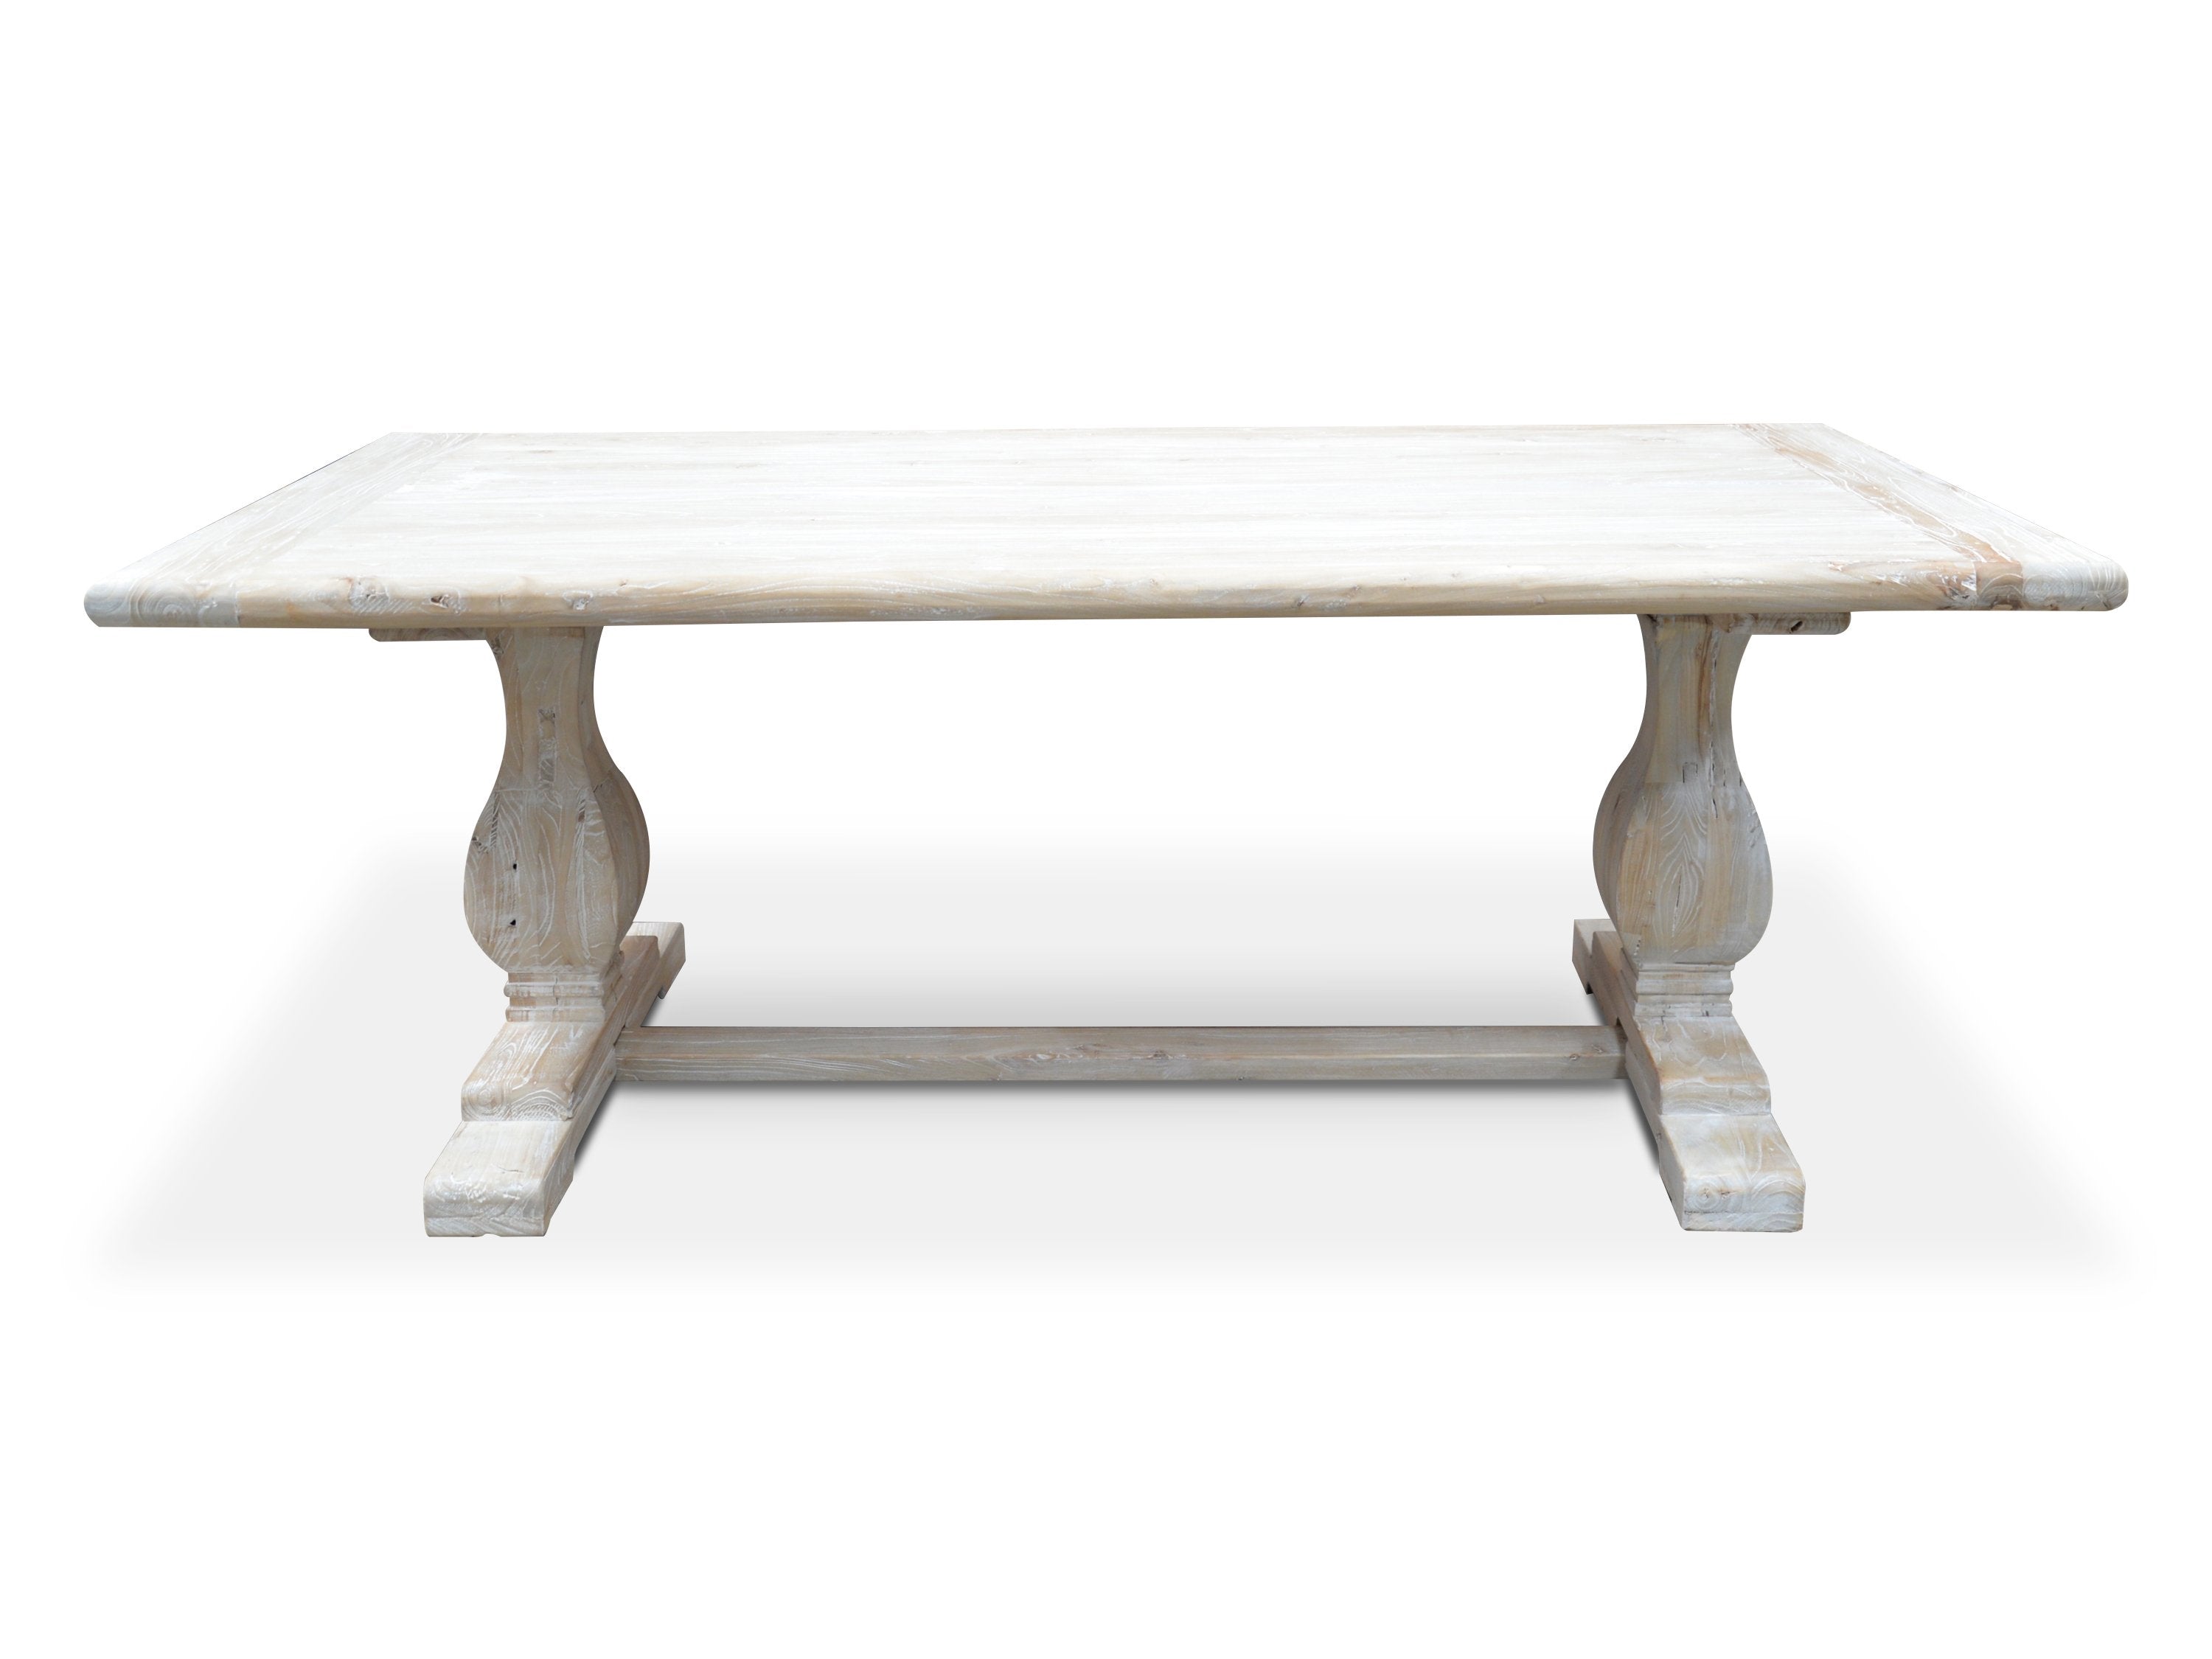 Mark Reclaimed 1.98m Ash Wood Dining Table - Rustic White Washed - Dining Tables